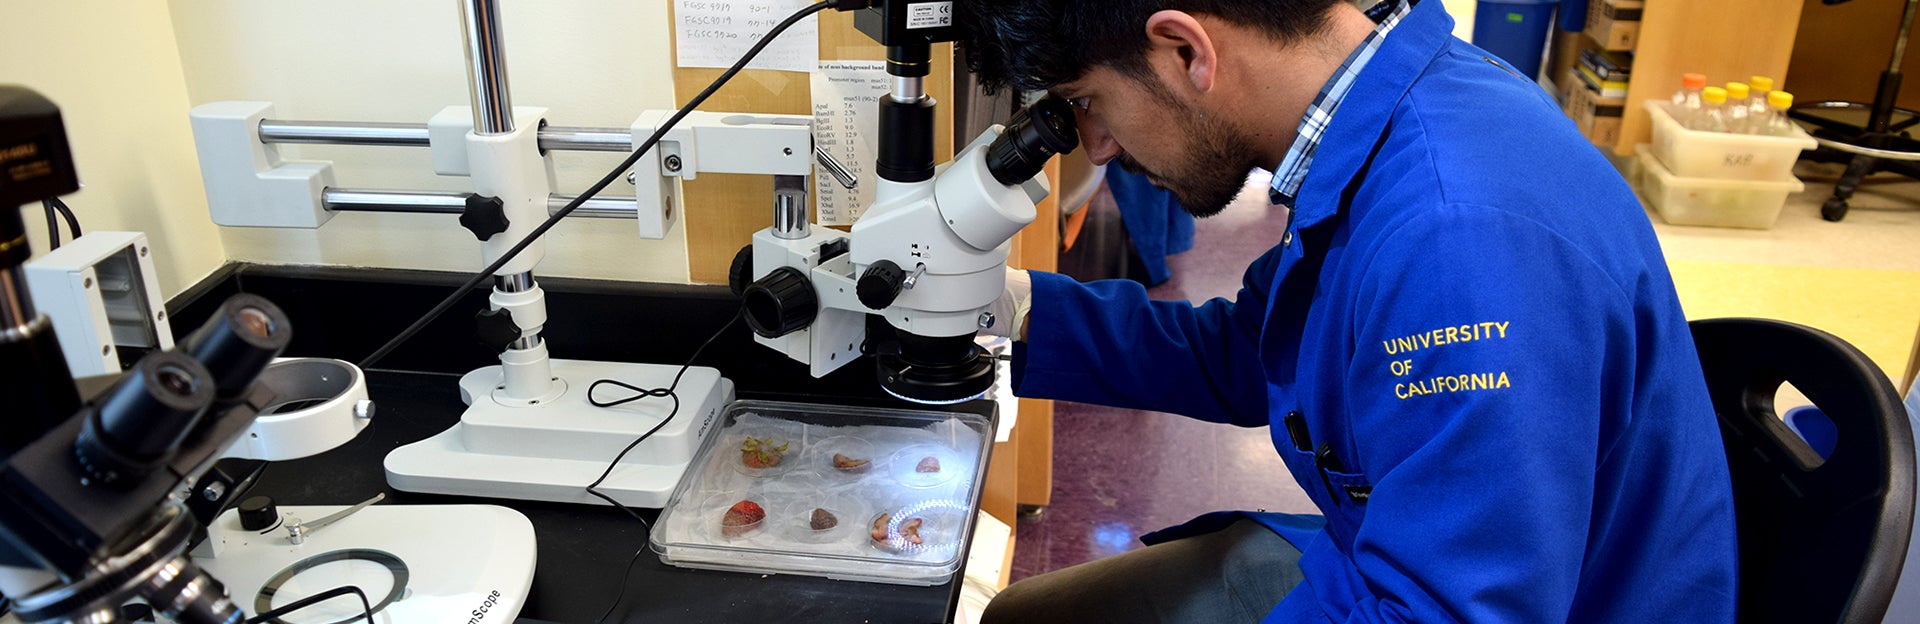 student looking through a microscope (c) UCR/CNAS